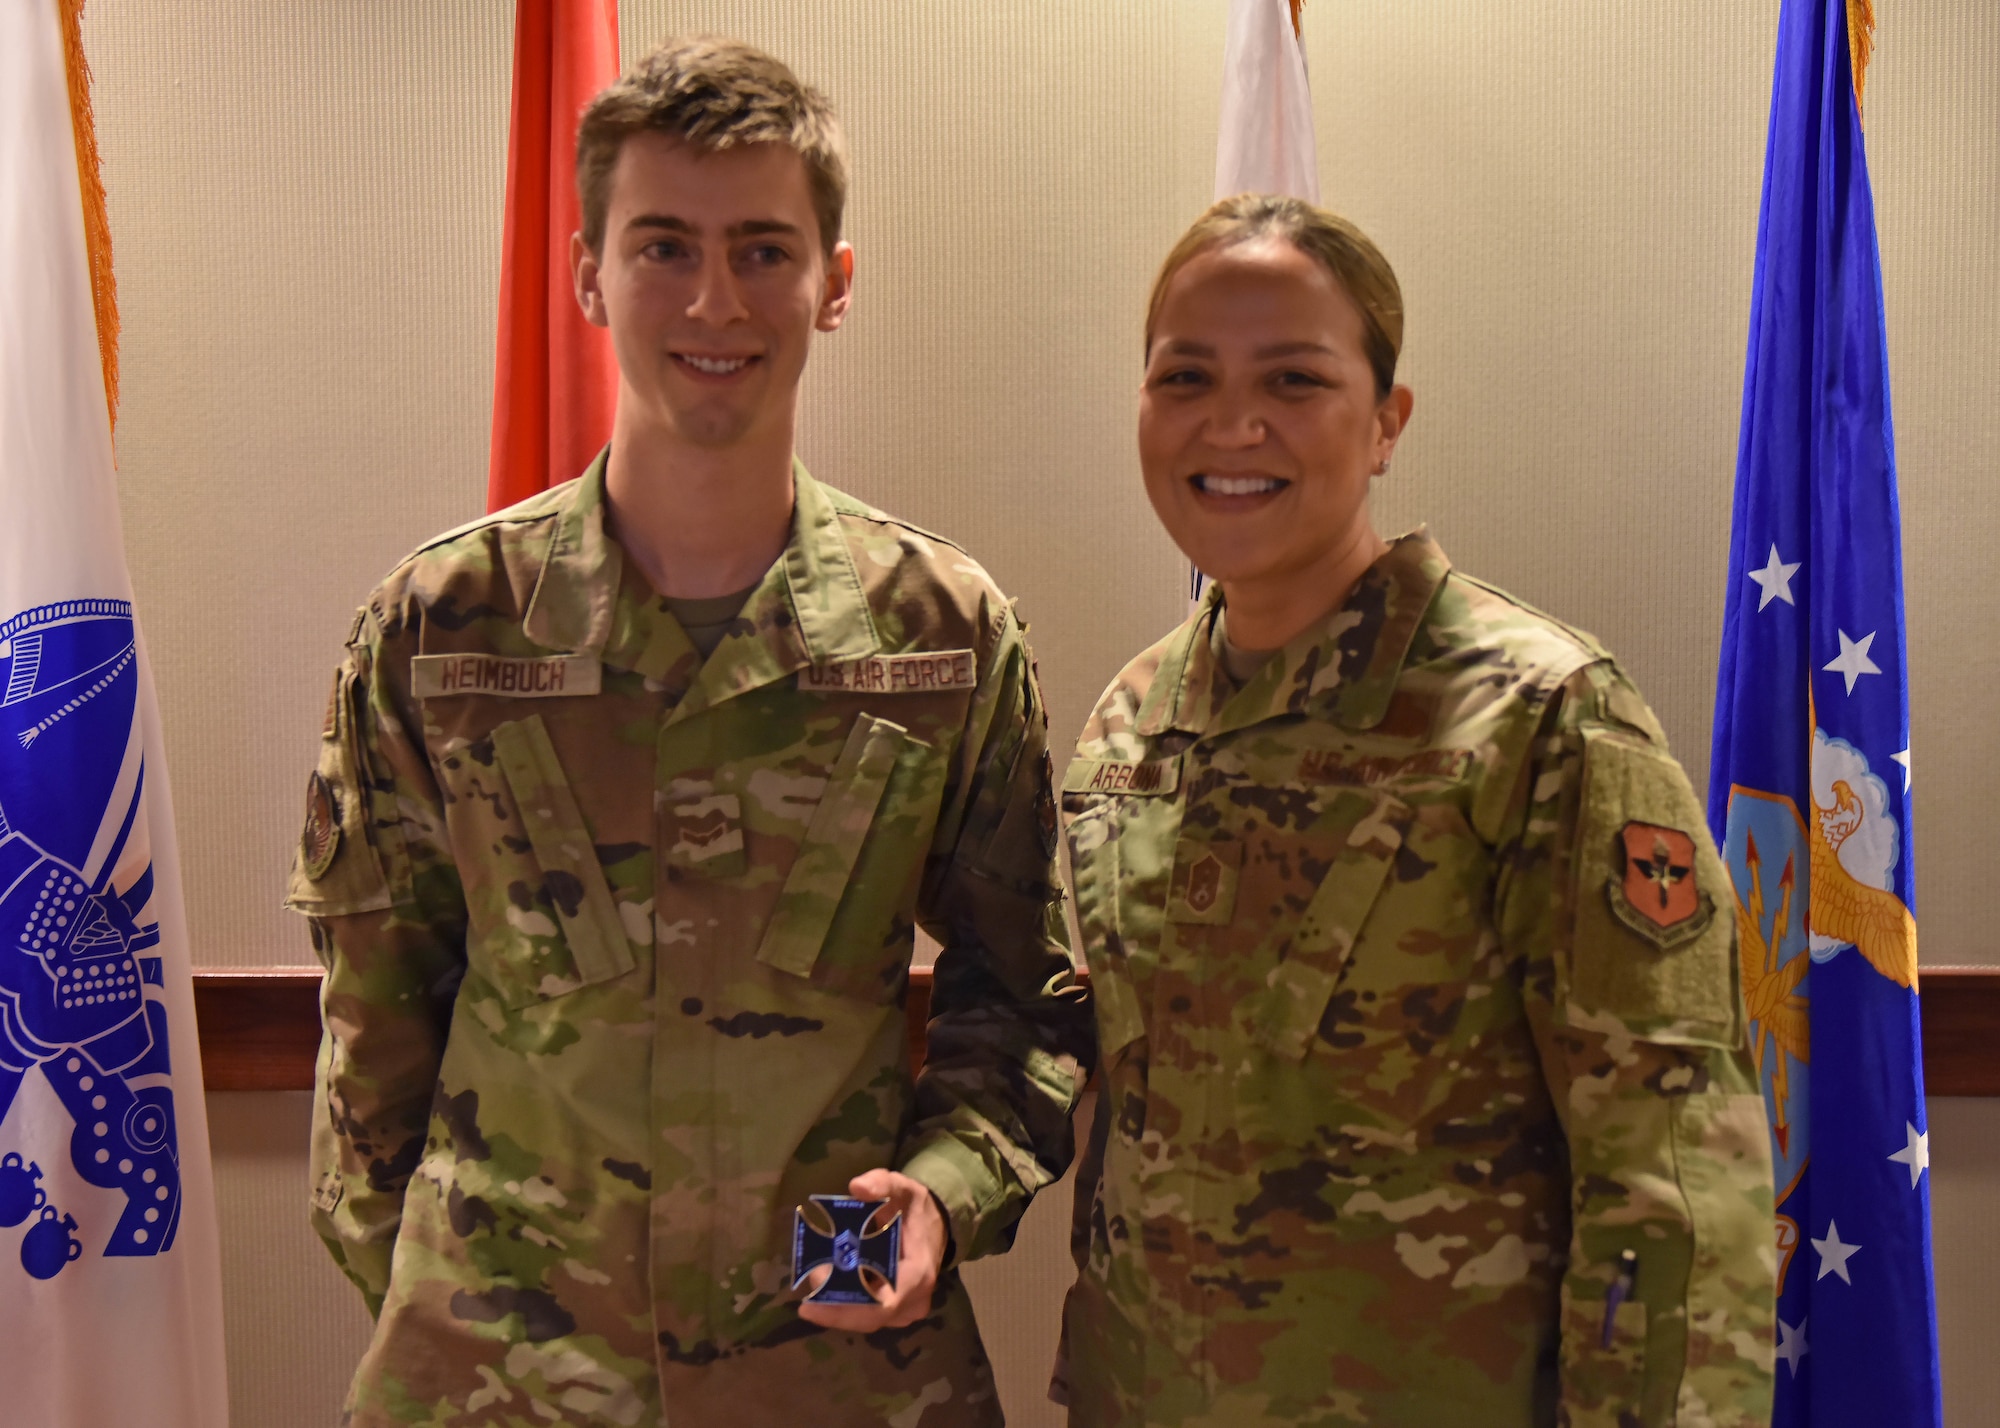 U.S. Air Force Airman 1st Class Zachary Heimbuch, 17th Training Wing Public Affairs specialist displays a coin given to him by Chief Master Sgt. Rebecca Arbona, 17th TRW command chief at Goodfellow Air Force Base, Texas, Jan. 18, 2023. Heimbuch was recognized at wing staff meeting for his positive mental attitude and hard work at the PA office. (U.S. Air Force photo by Senior Airman Ethan Sherwood)